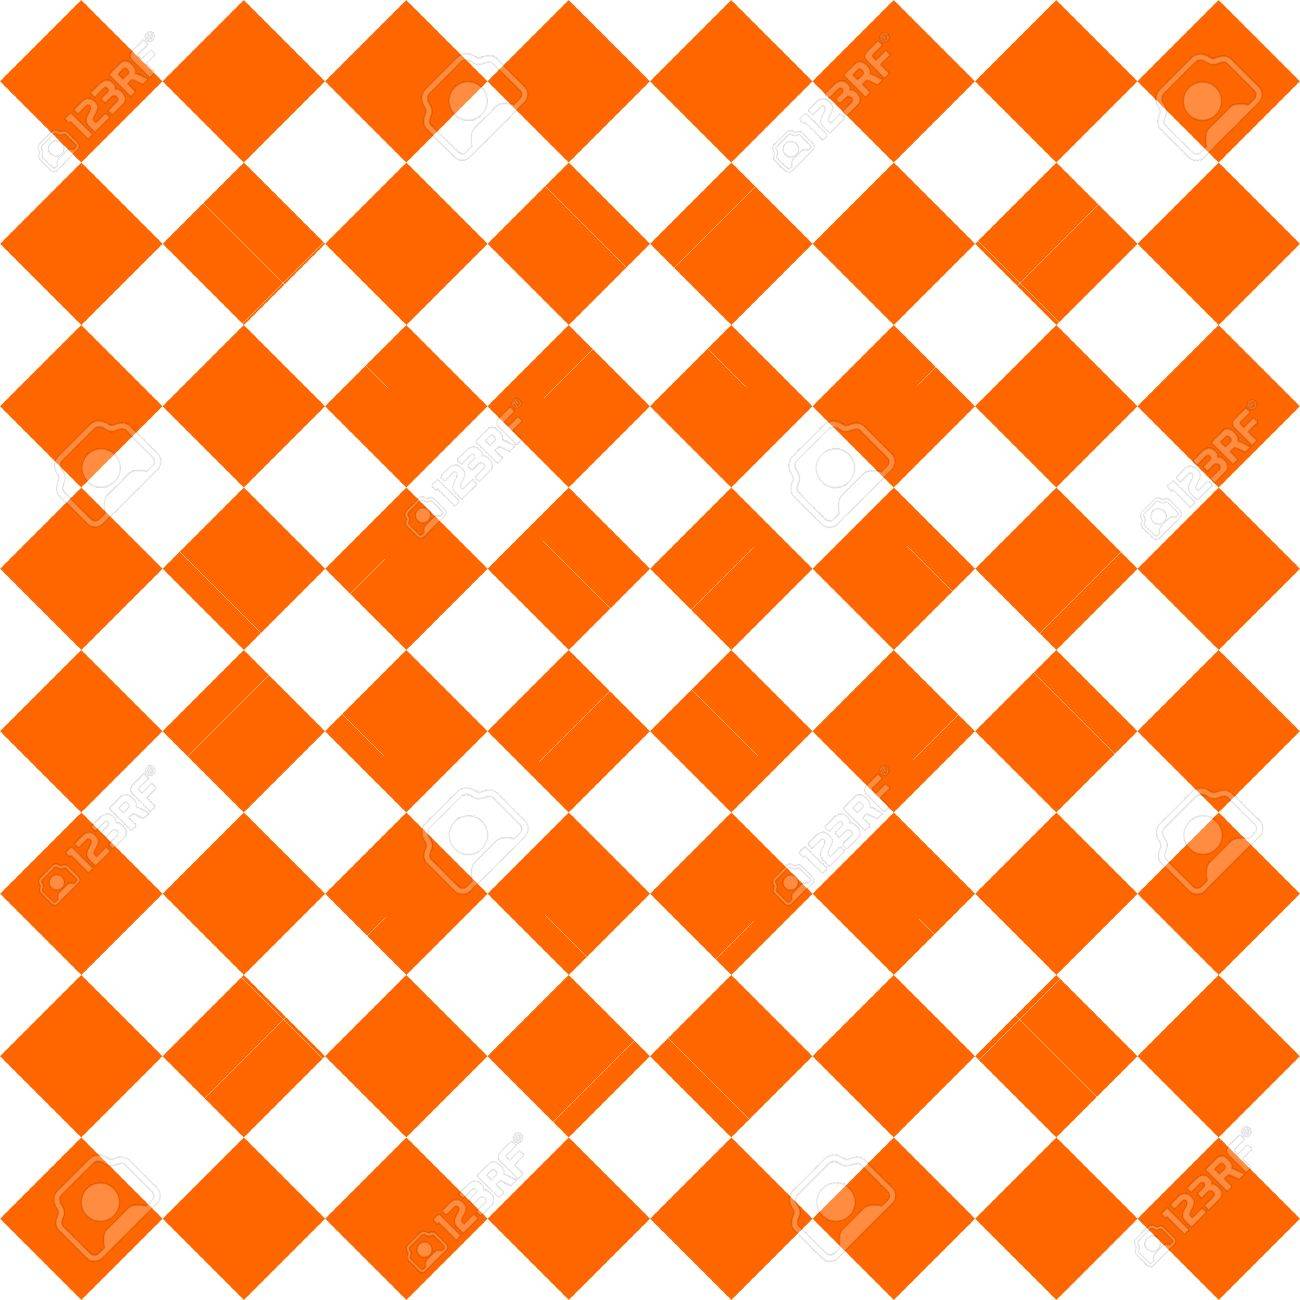 Checkered Tile Pattern Or Orange And White Wallpaper Background